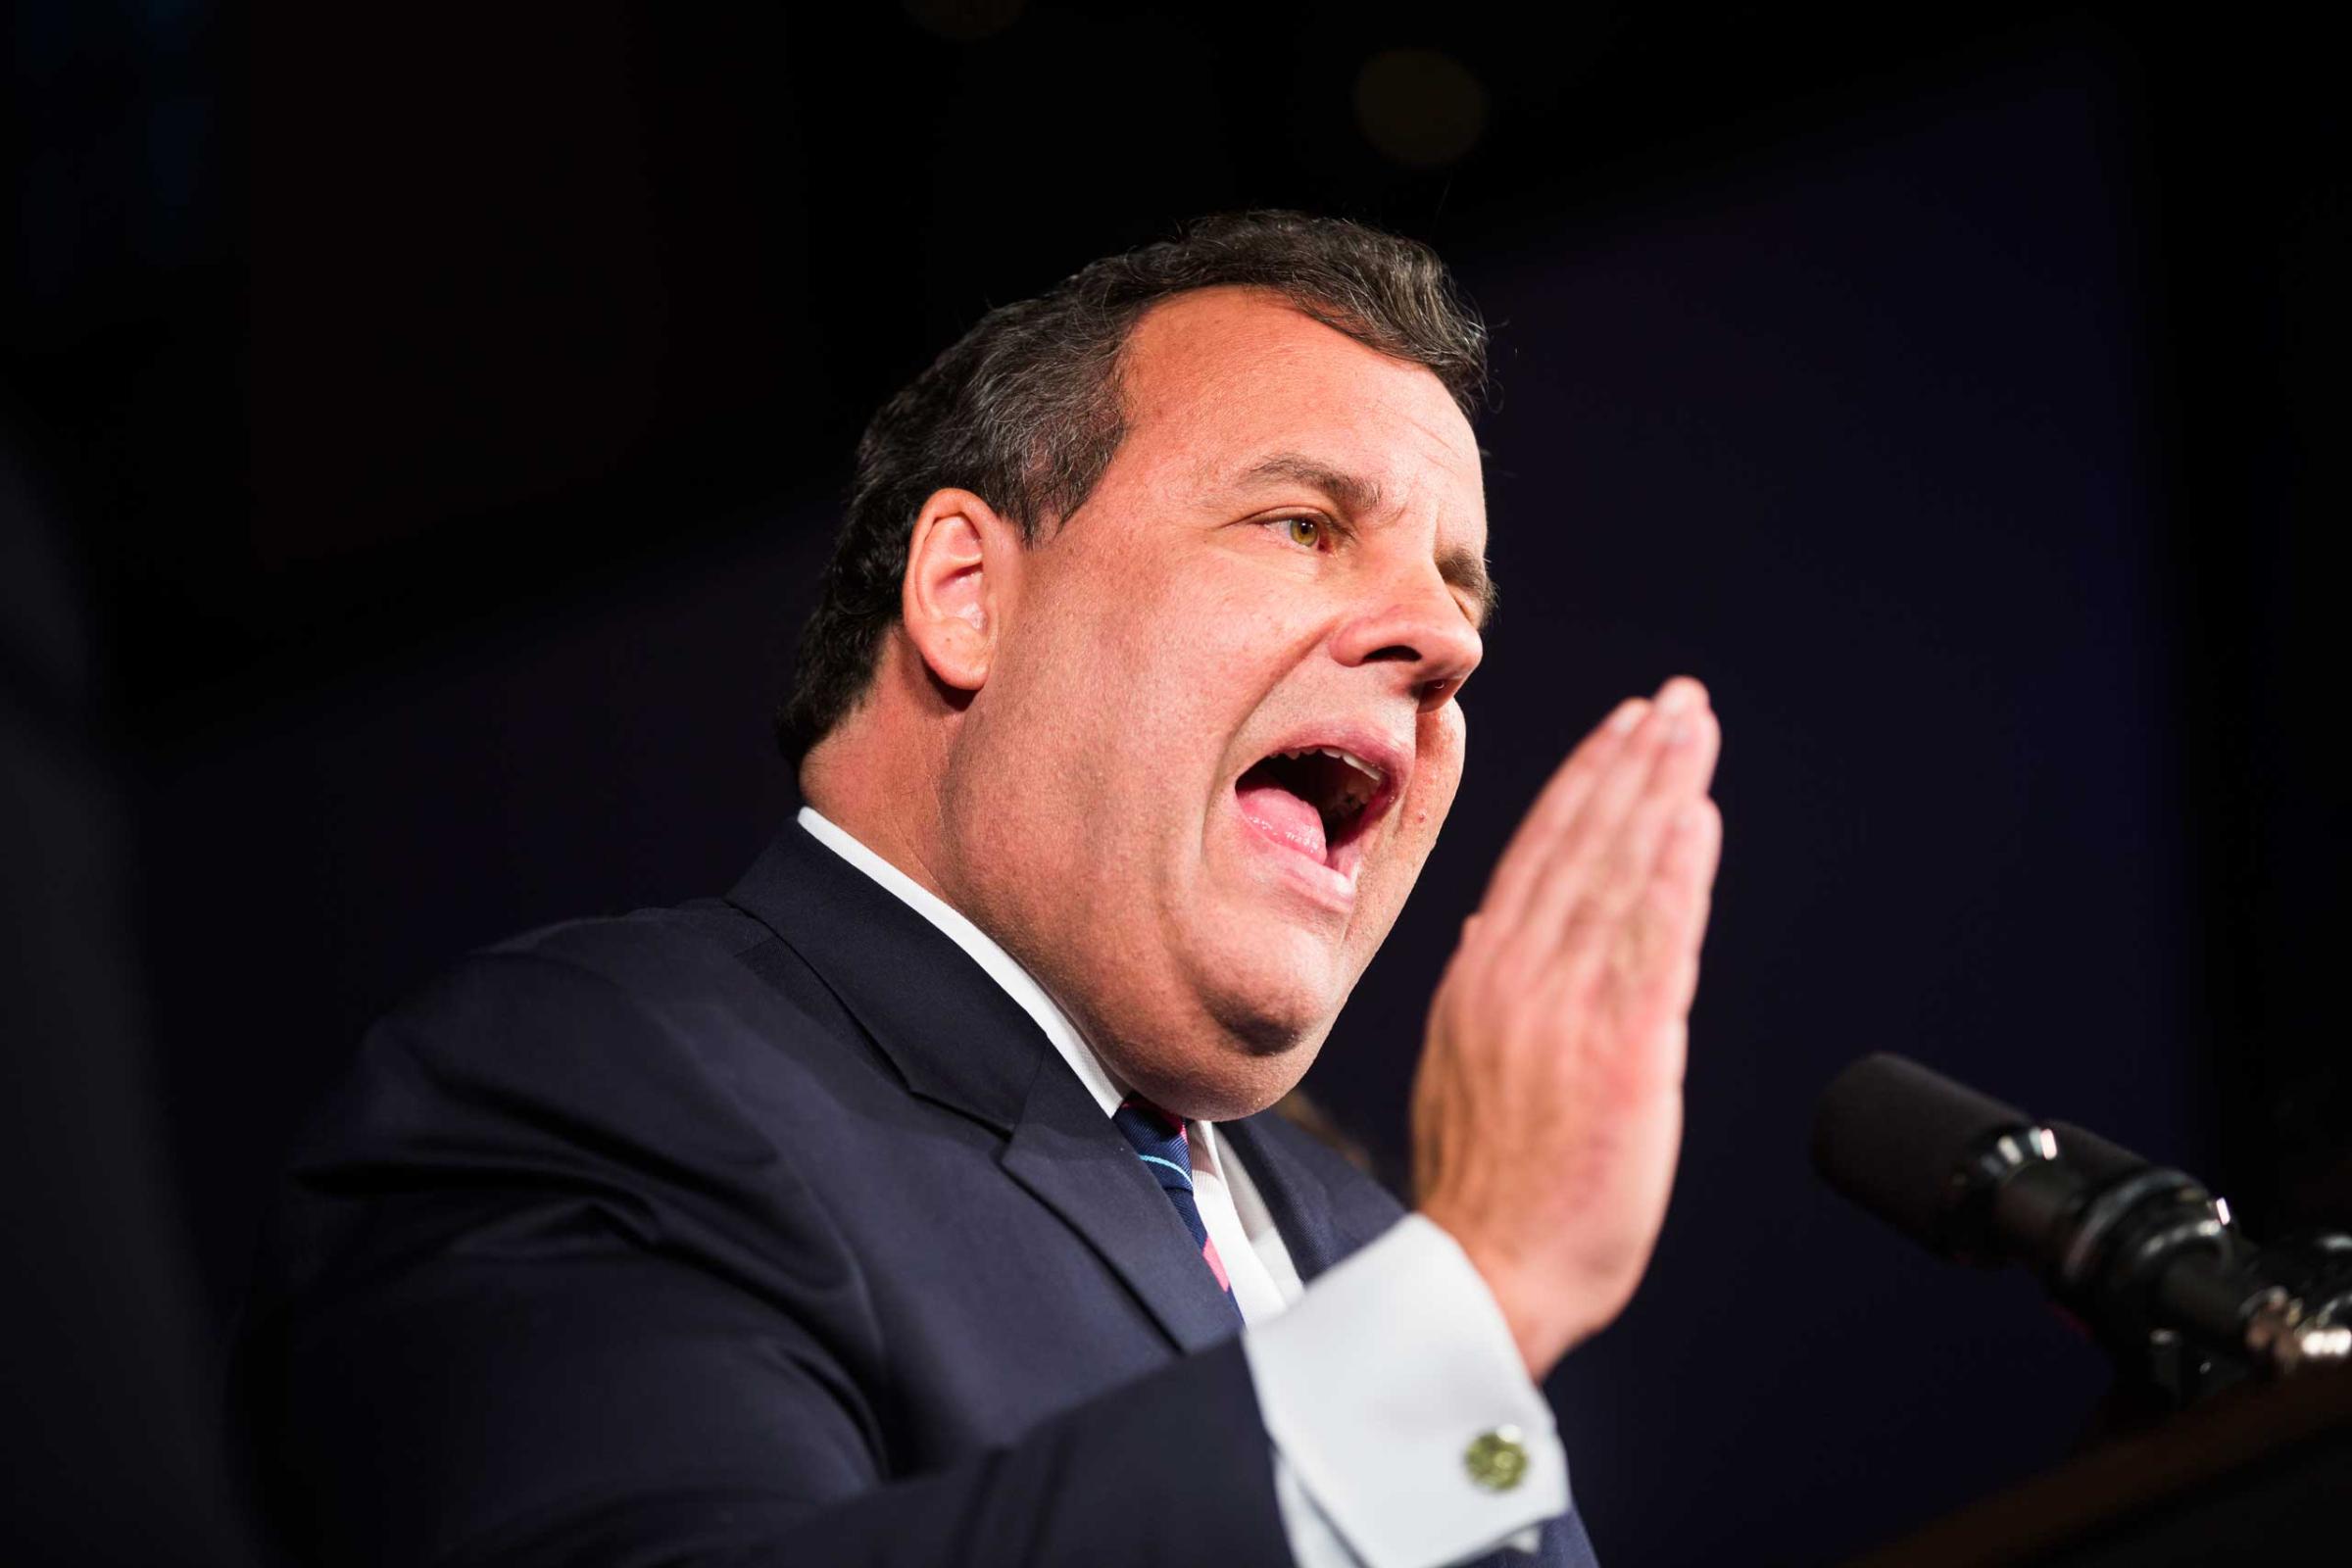 Governor Chris Christie is Reelected to a Second Term